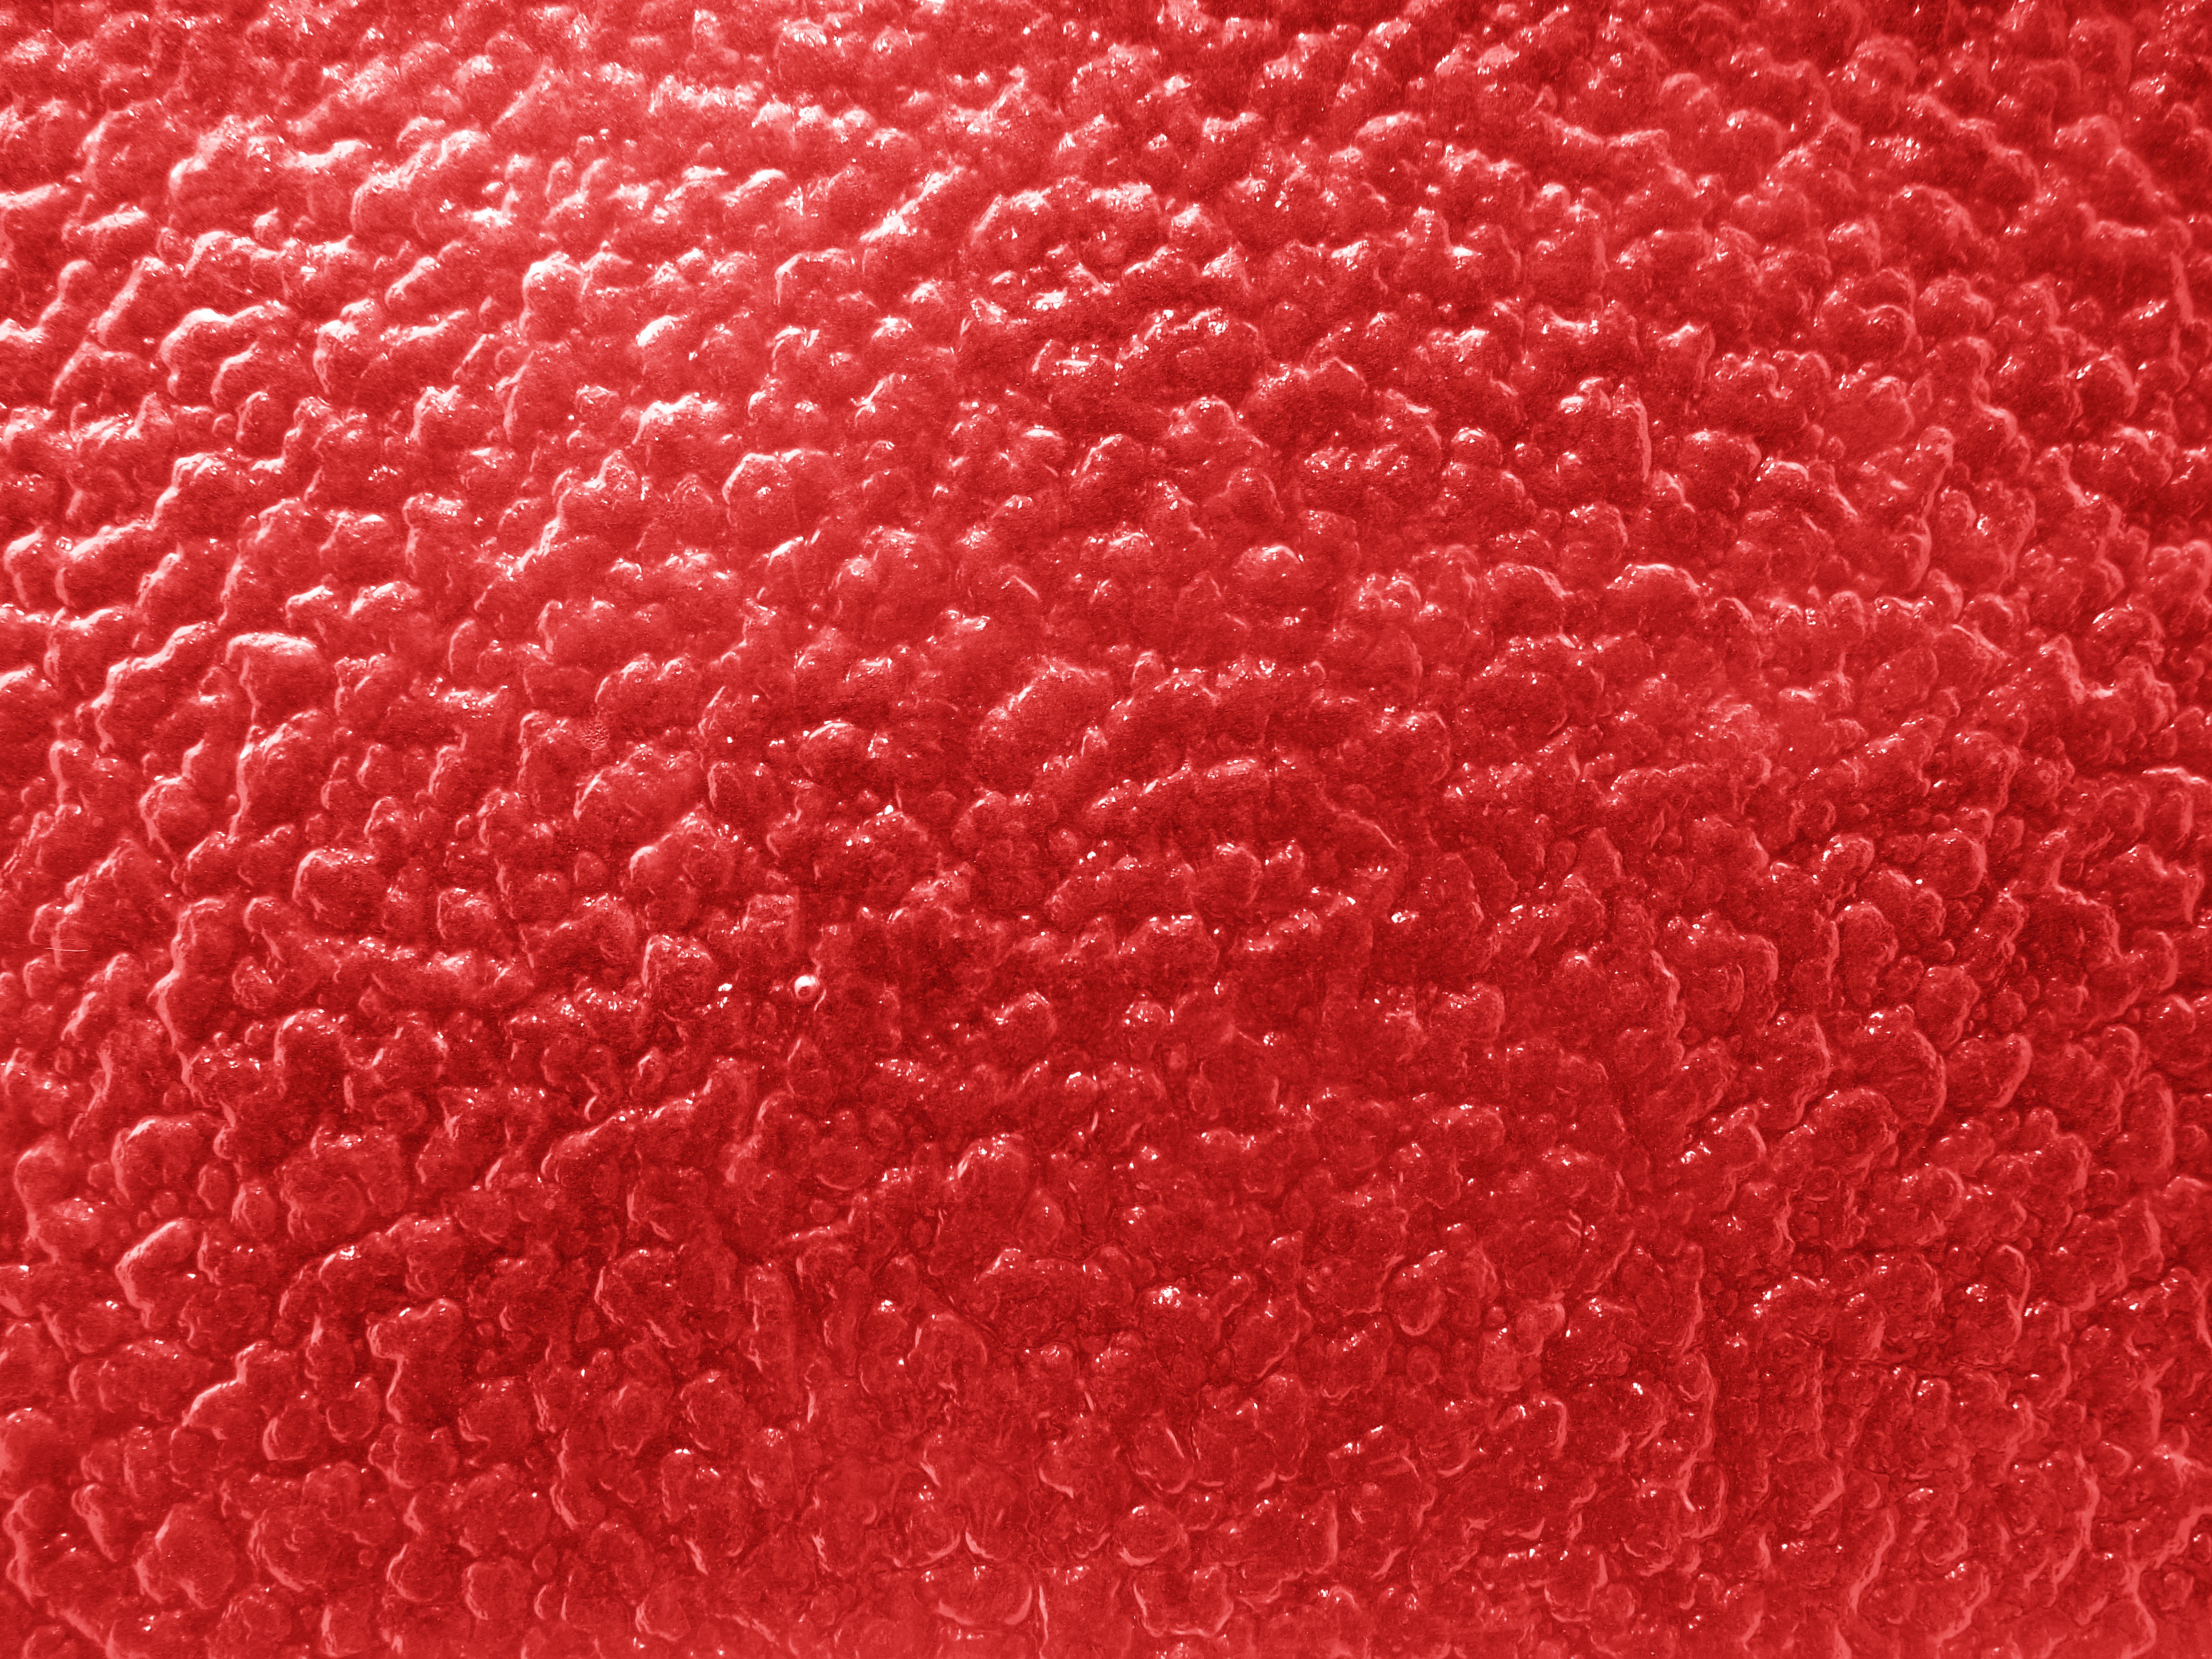 Red Textured Glass with Bumpy Surface Picture | Free Photograph ...